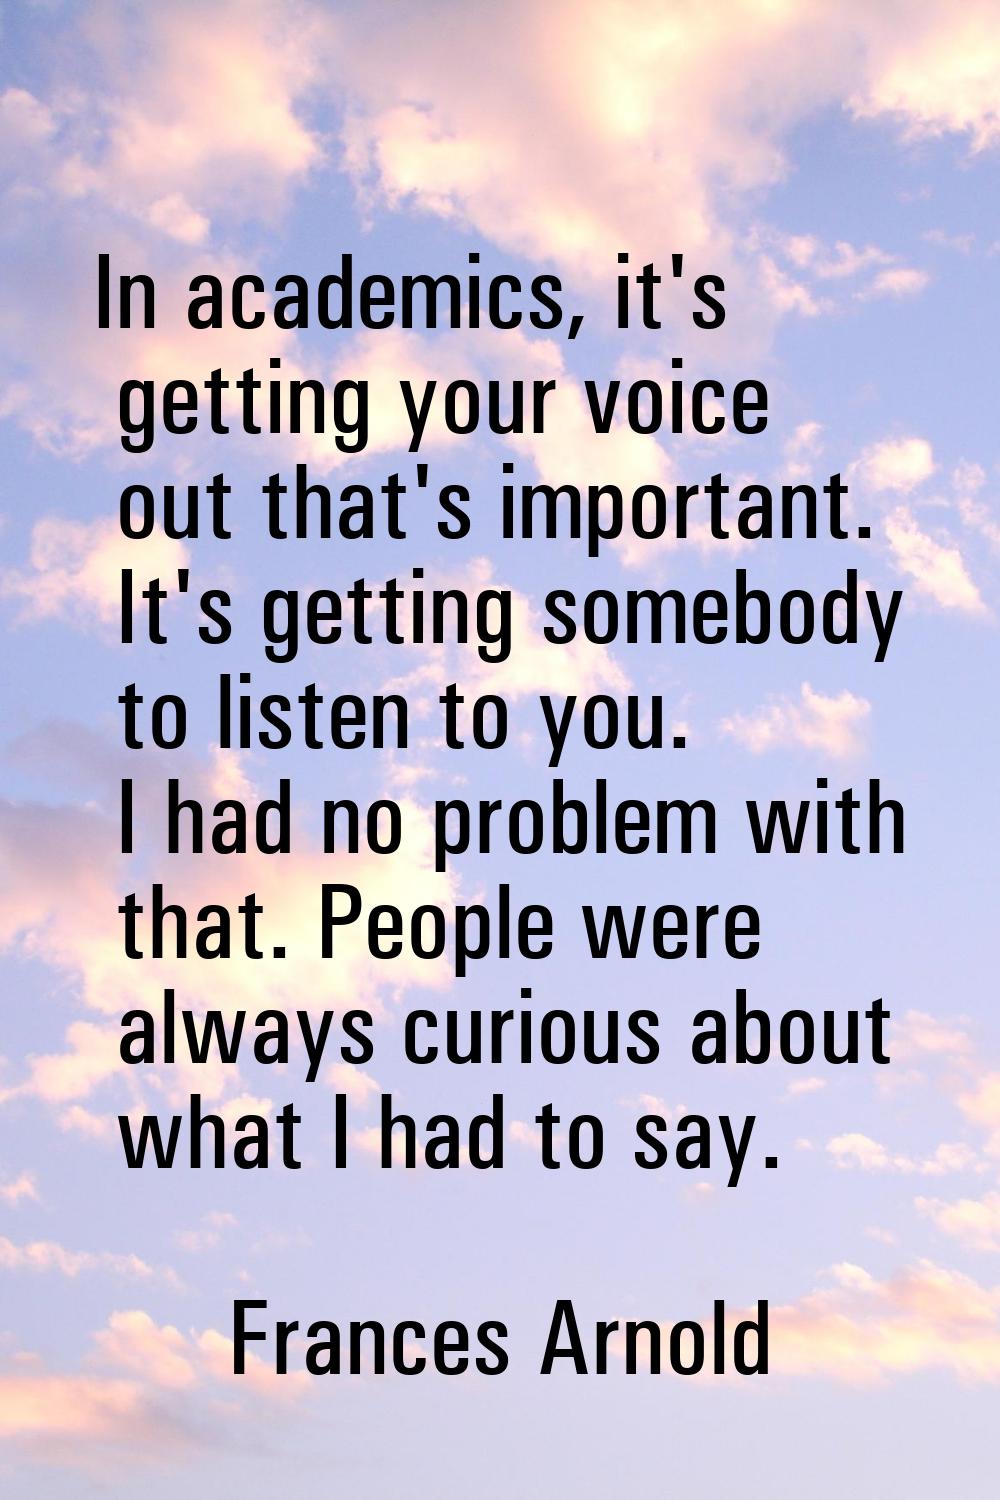 In academics, it's getting your voice out that's important. It's getting somebody to listen to you.